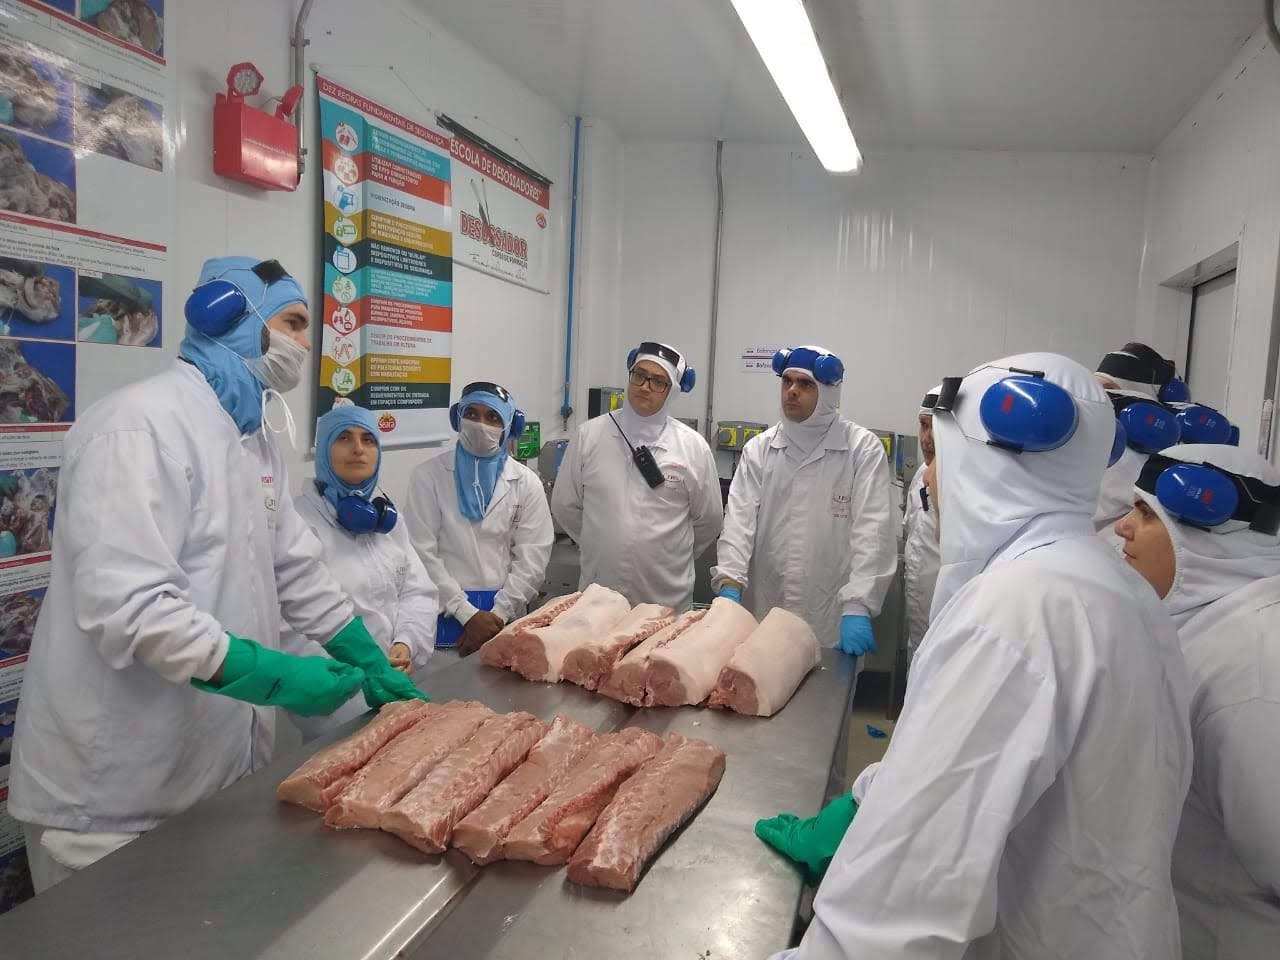 Meat quality training in Brazil